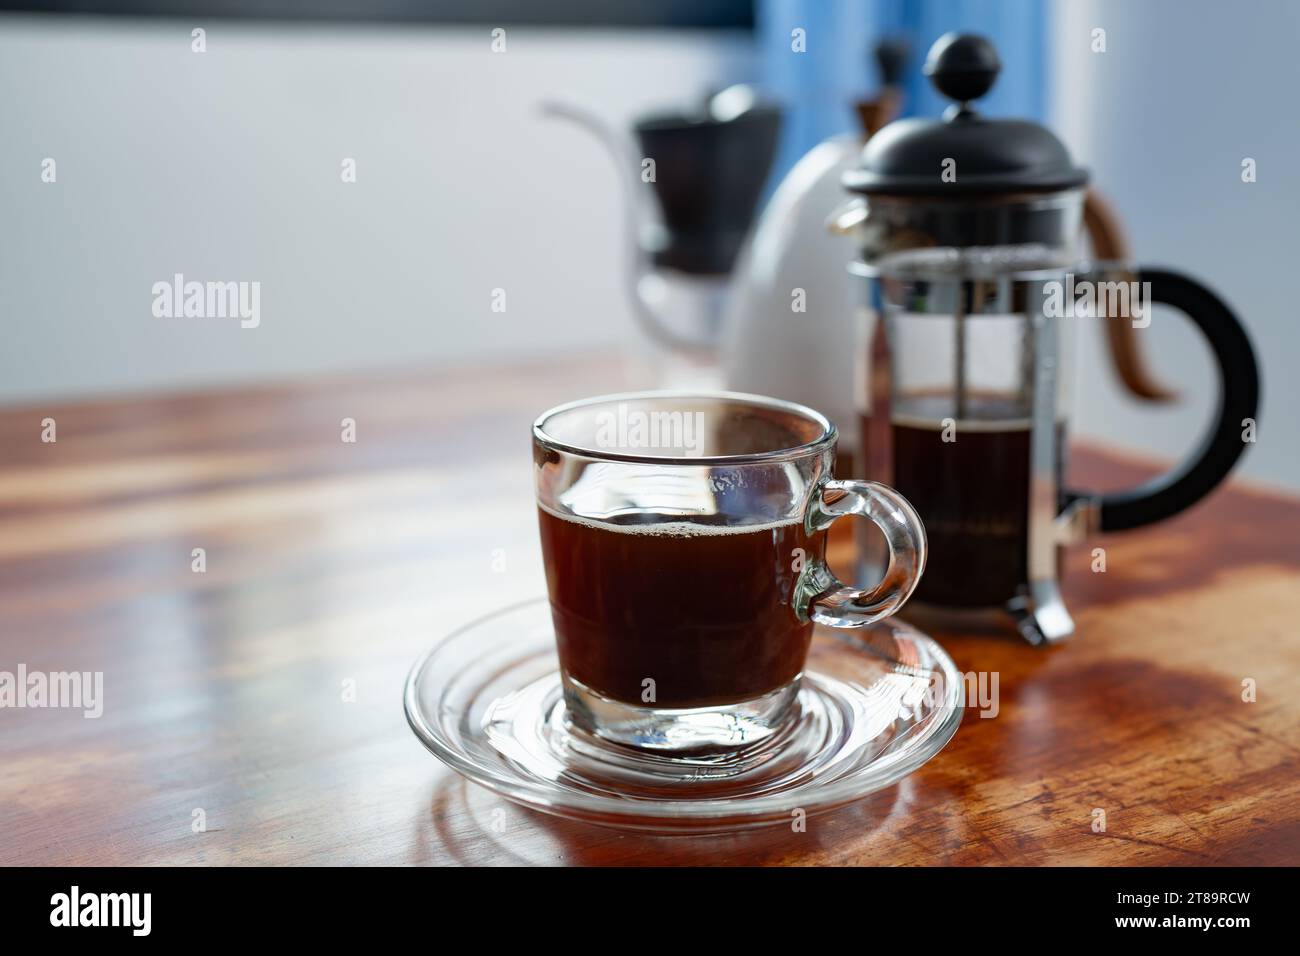 A cup of French press coffee on a table Stock Photo